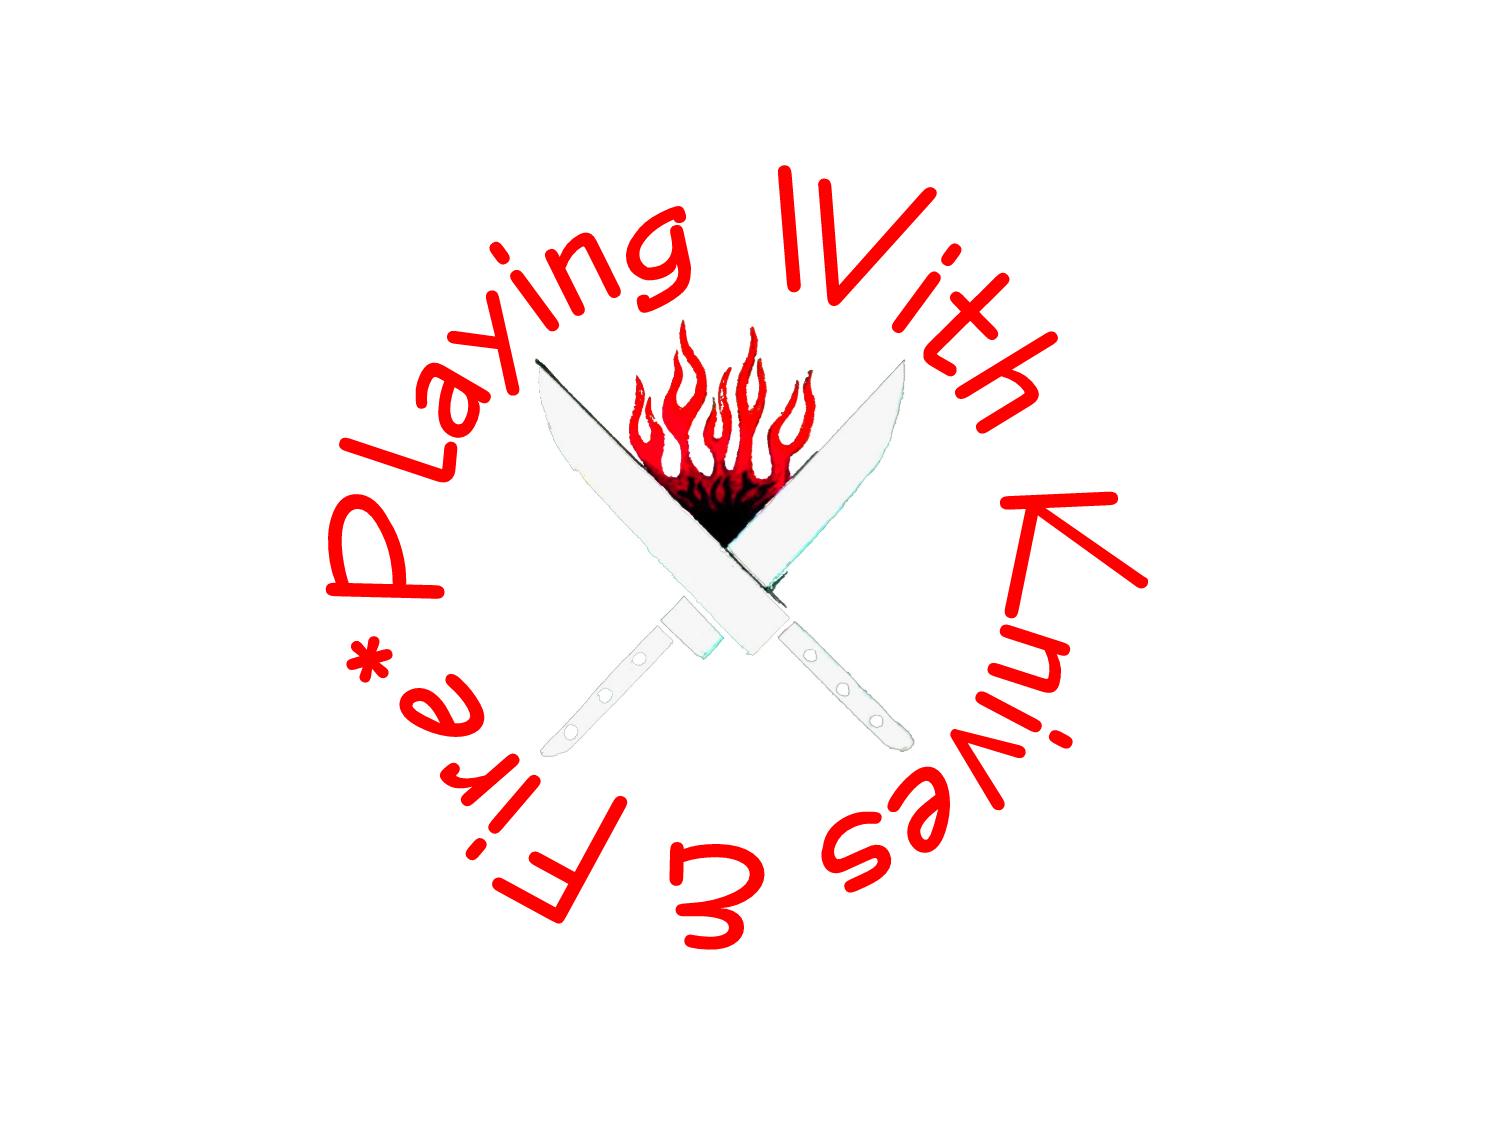 [Playing+with+knives+&+fire+logo.jpg]